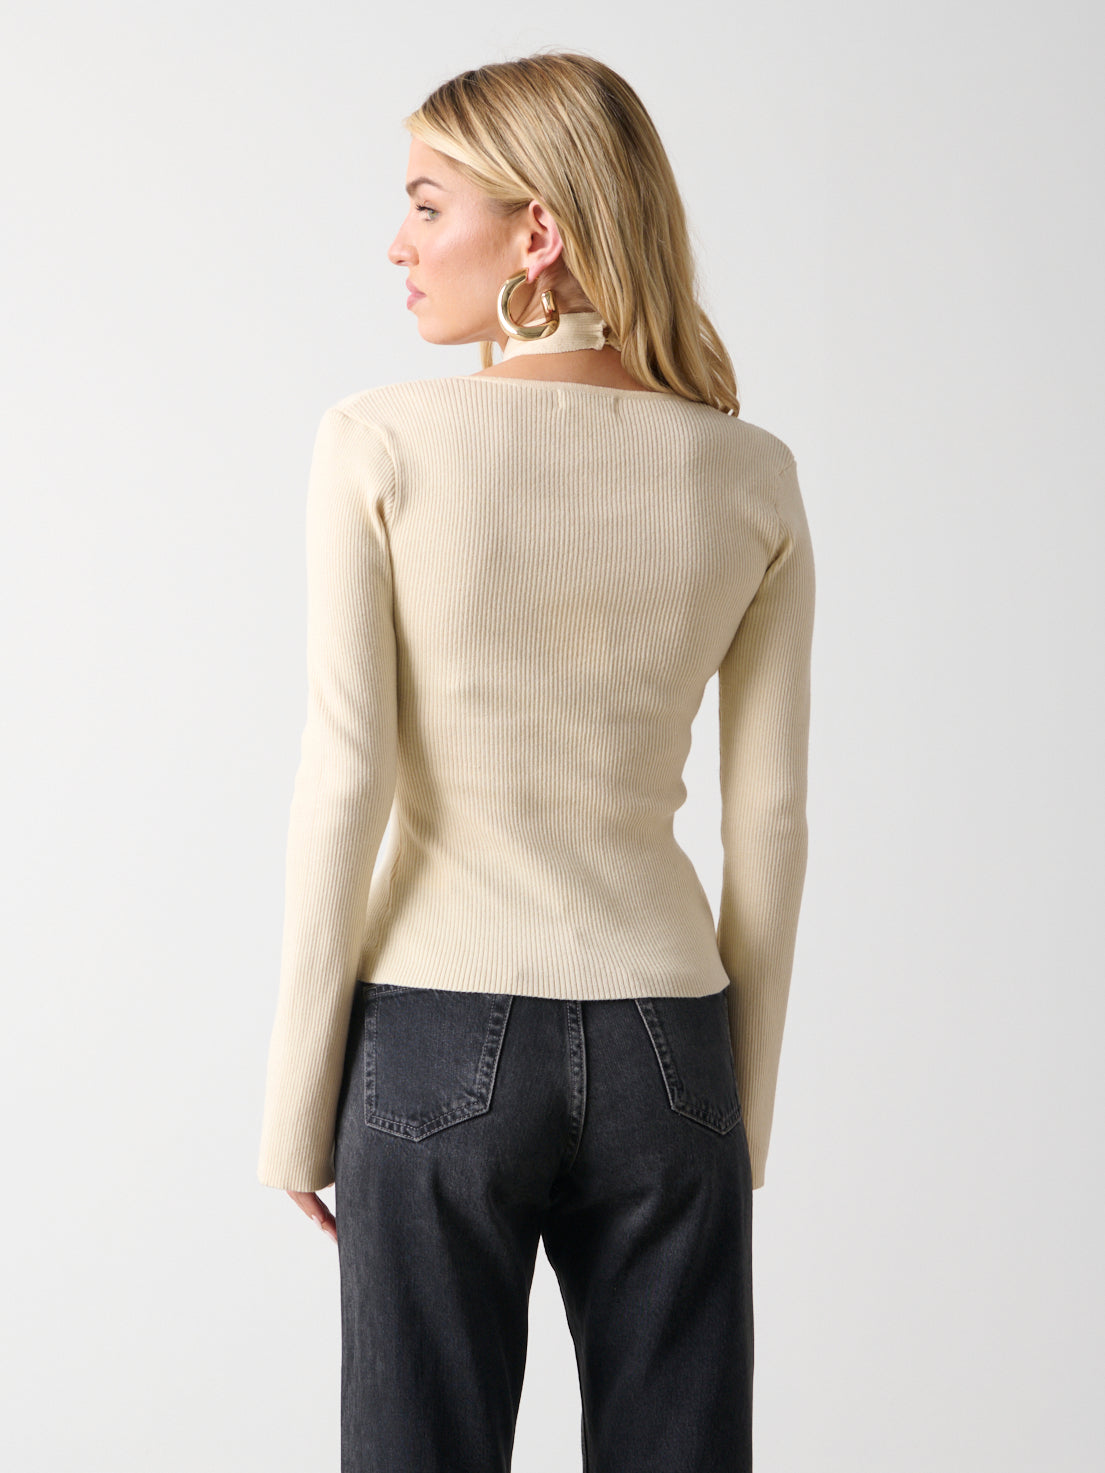 Amity Knotted Halterneck Long Sleeve Top - Cream